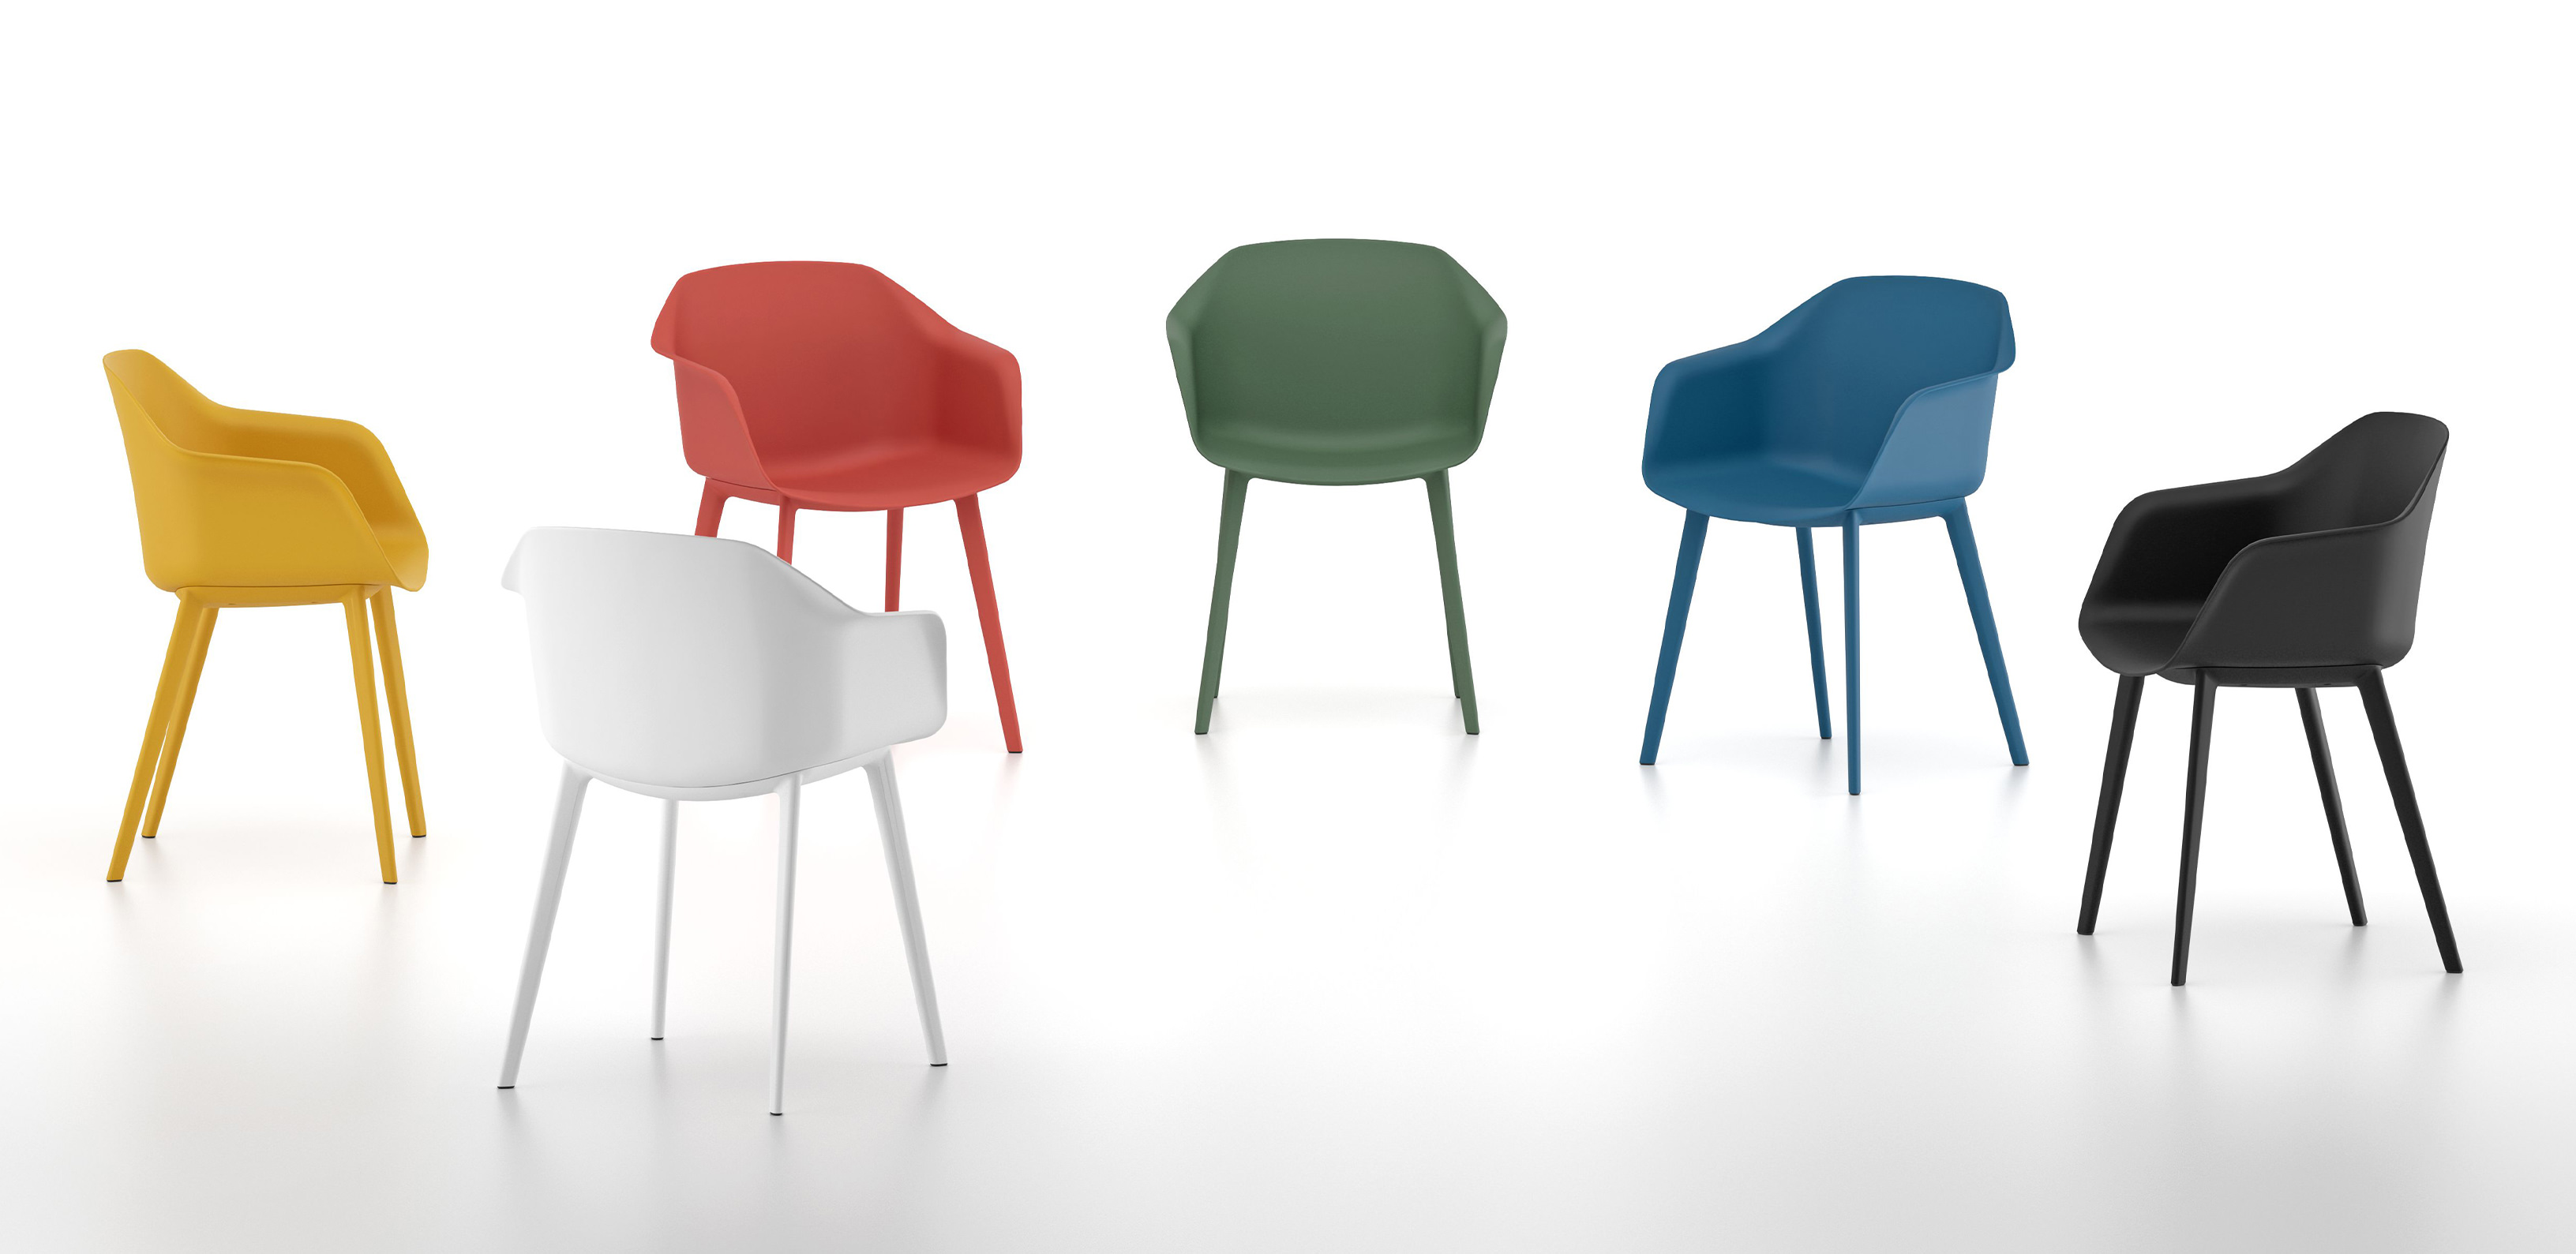 Coleurí chairs in all available colors.